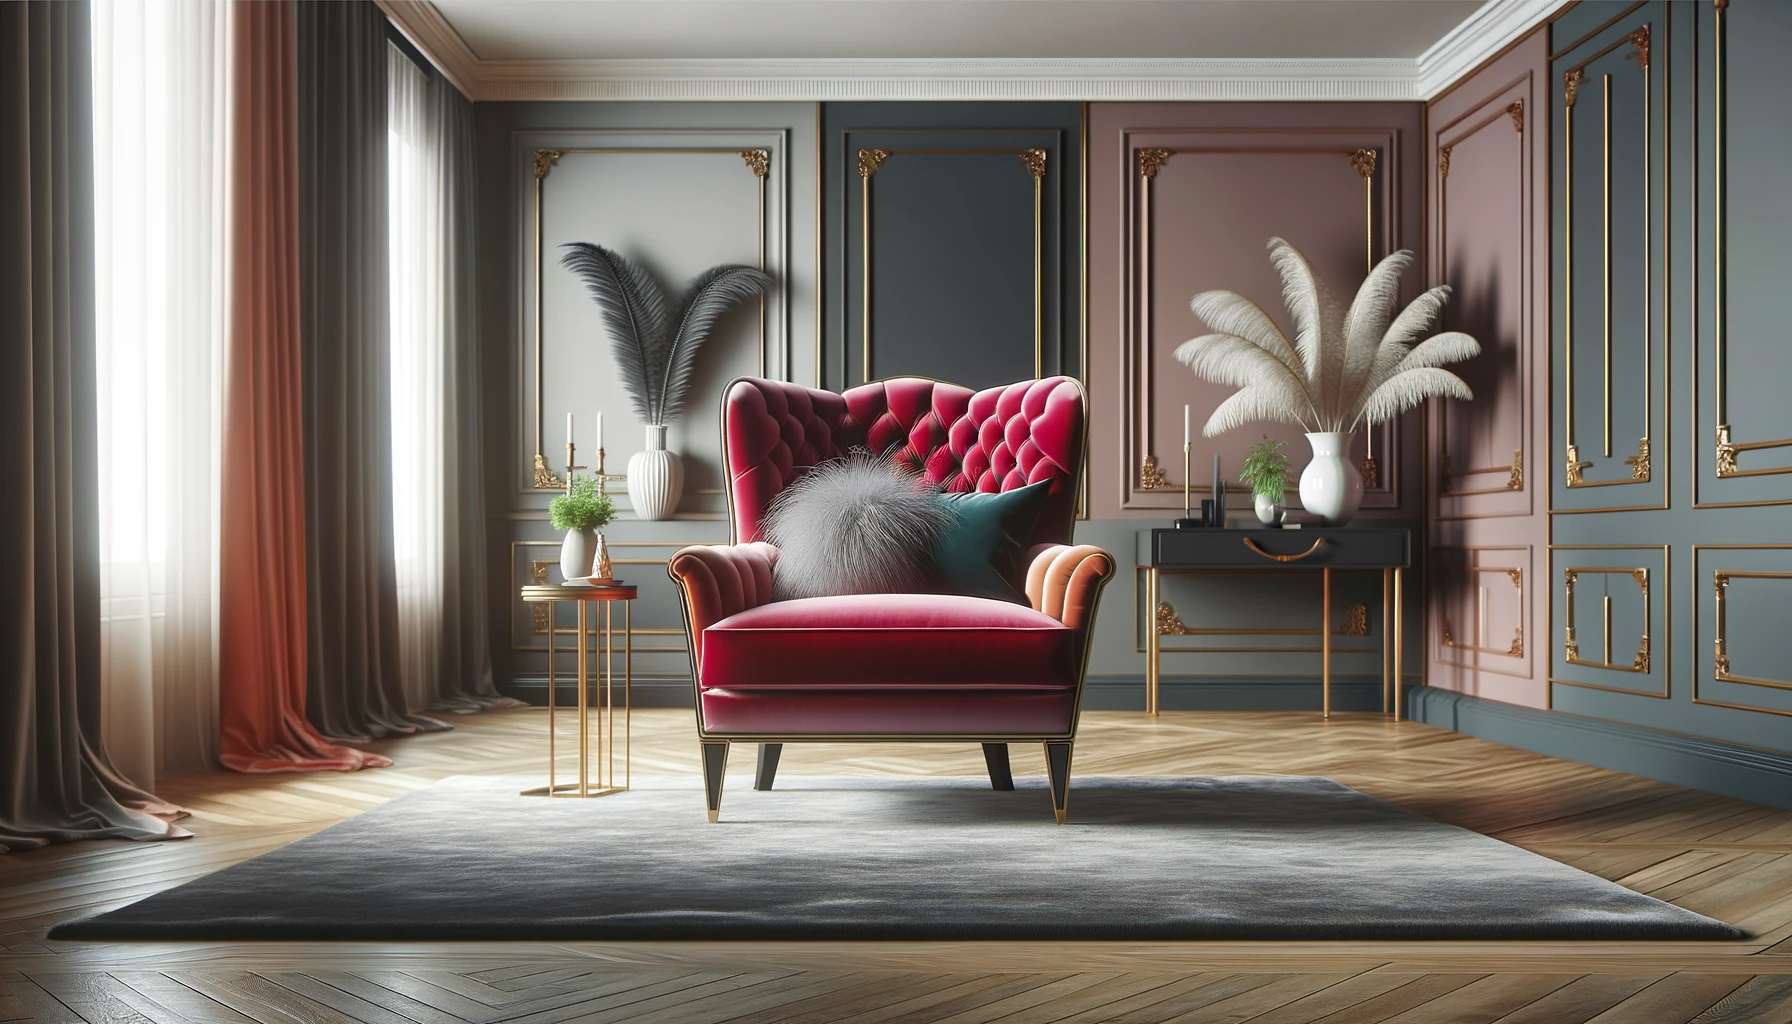 A luxurious living room showcasing a bold, colorful accent chair as the focal point